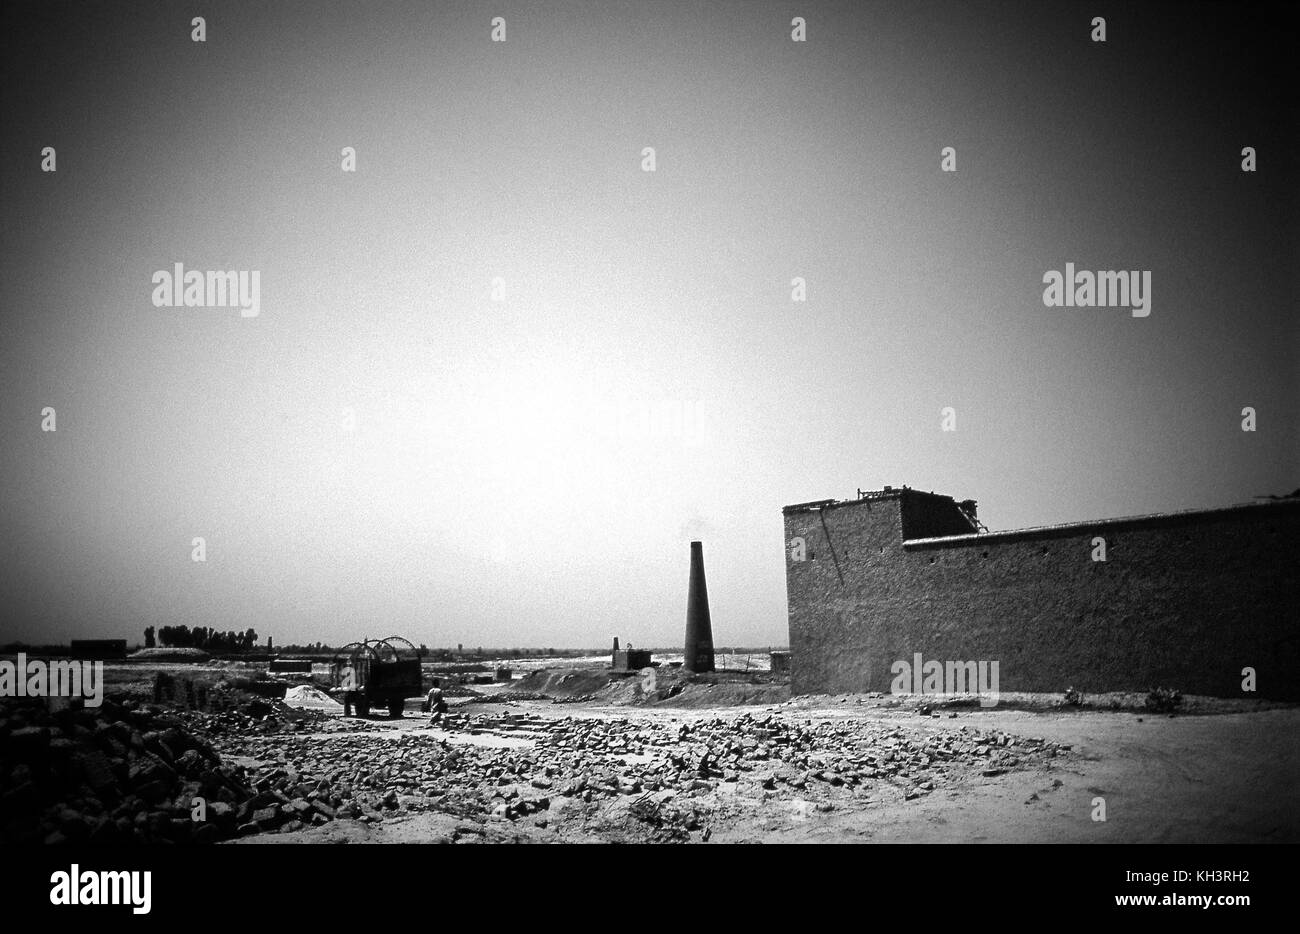 Image of a brick factory where the workers are mainly afghan refugees near Peshawar, Pakistan. Date: 8/2000. Photographer: Xabier Mikel Laburu Stock Photo